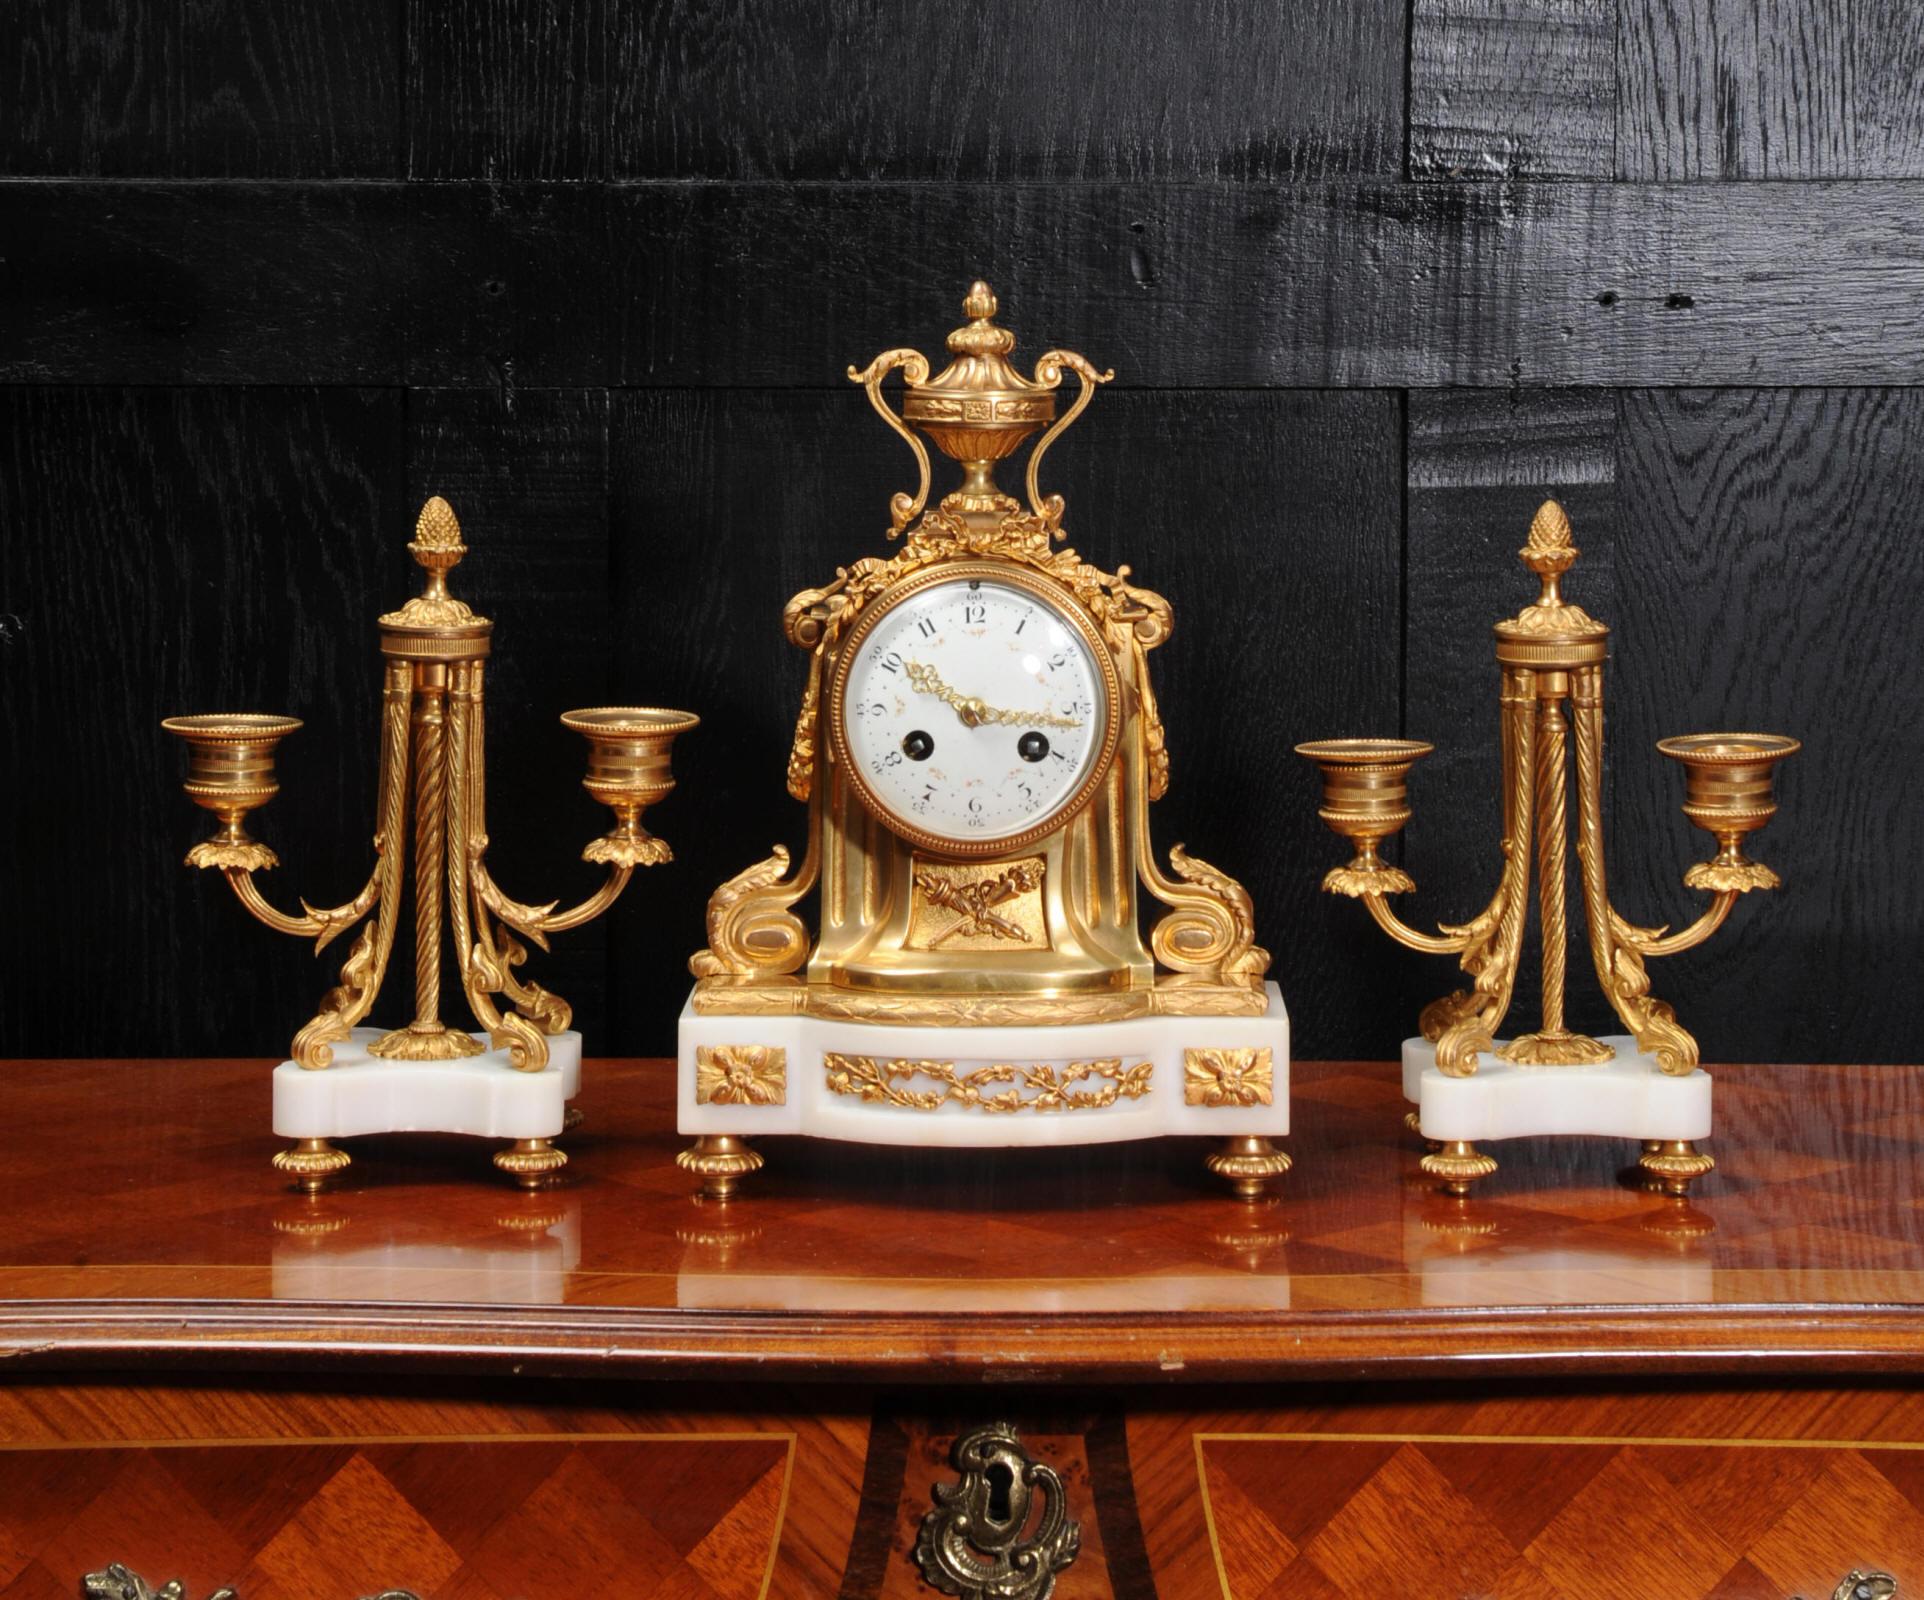 A fine and elegant original antique French Louis XVI style clock set, circa 1860. It is beautifully made of beautiful white marble mounted with very good quality ormolu (finely gilded bronze). To the sides are scroll brackets with acanthus leaves.